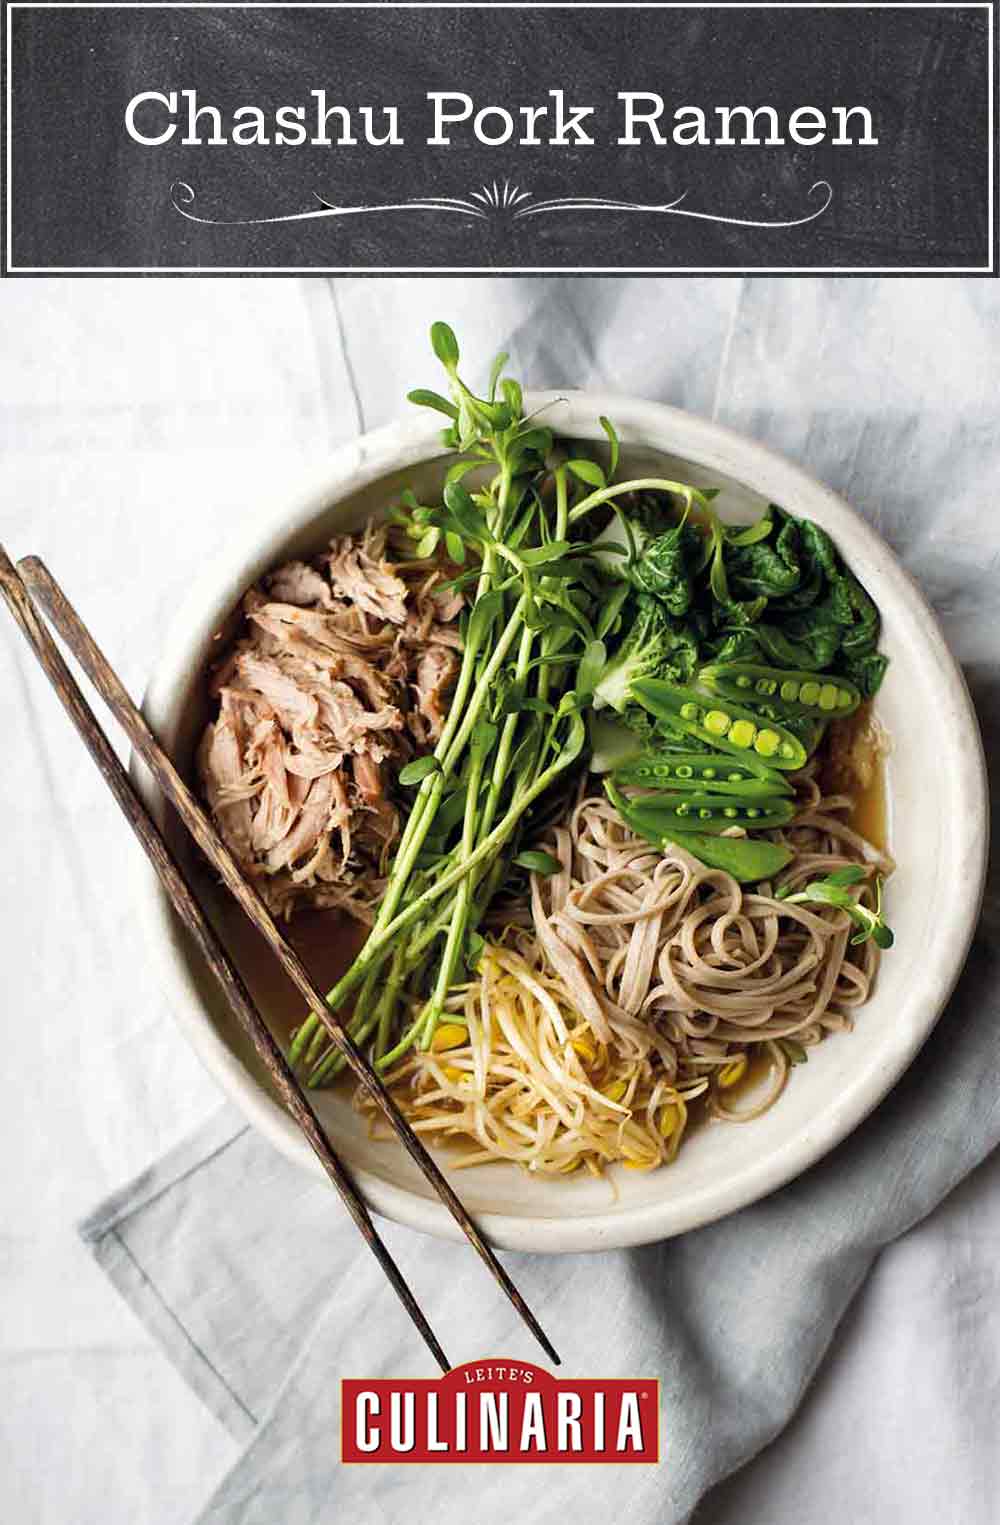 A bowl of chashu pork ramen, filled with braised pork, soba noodles, bean sprouts, peas, and bok choy, with a pair of chopsticks resting on top.